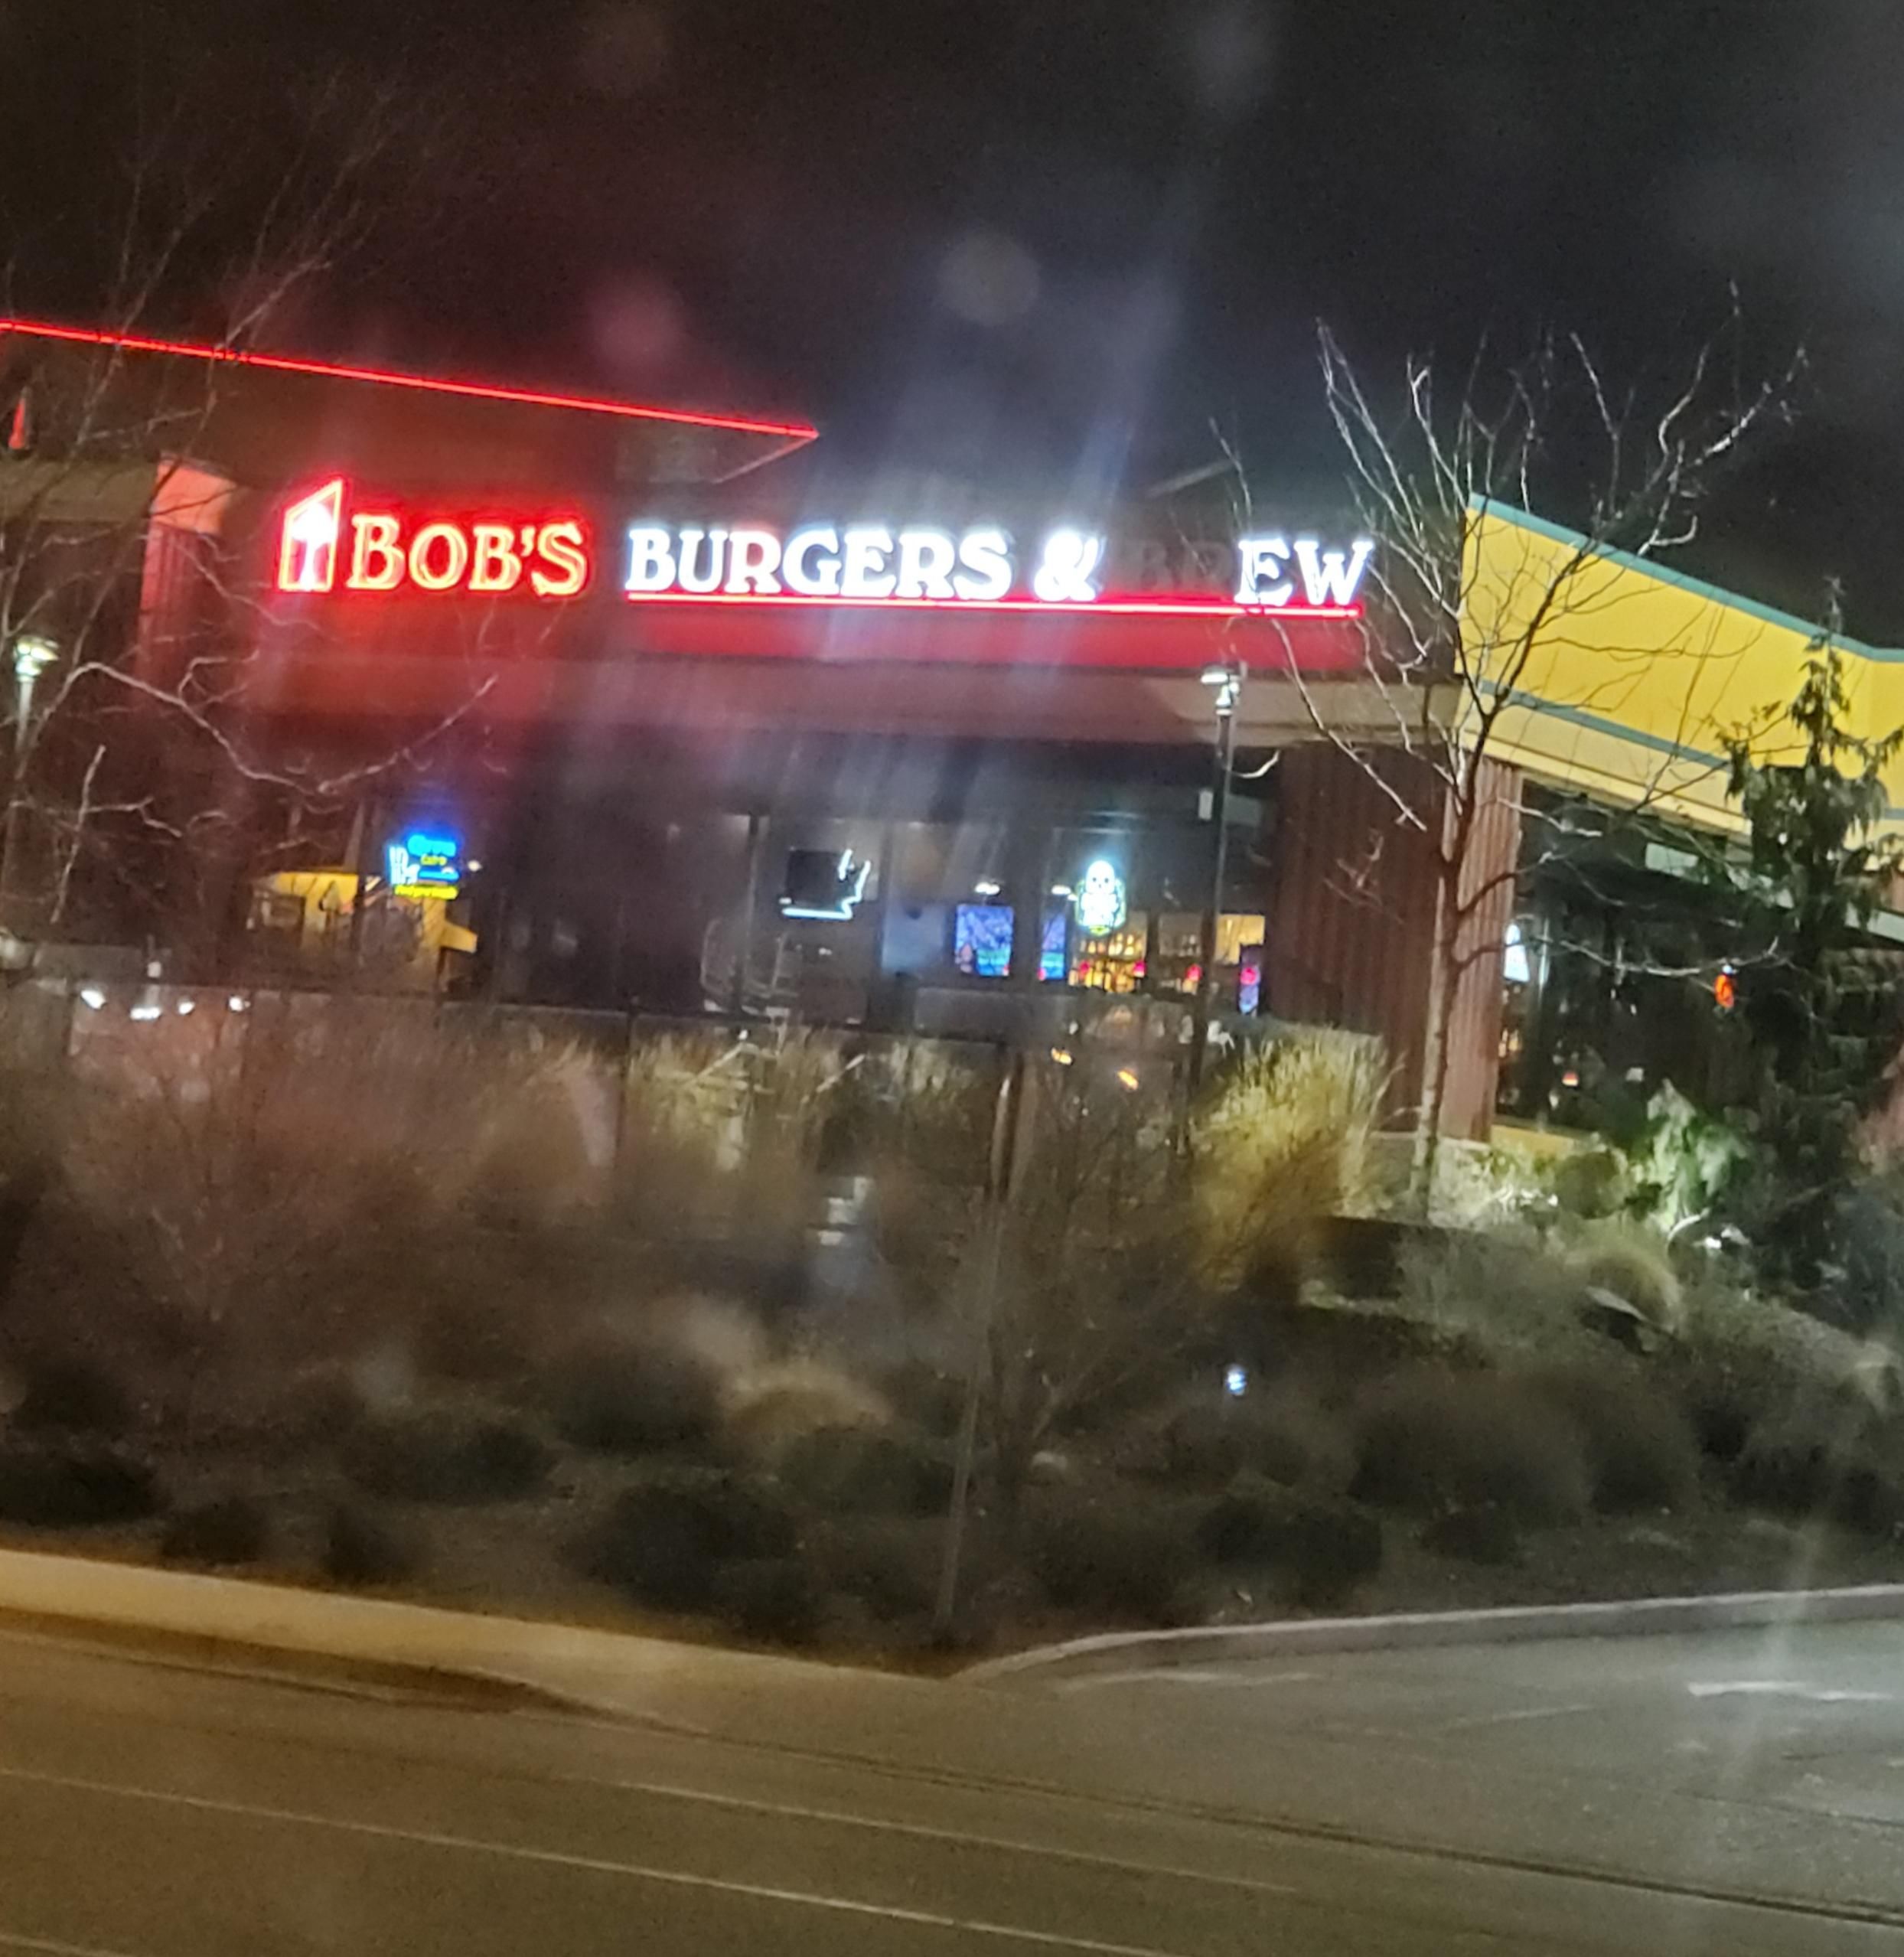 I always wanted to go to "Bob's Burgers and ew"